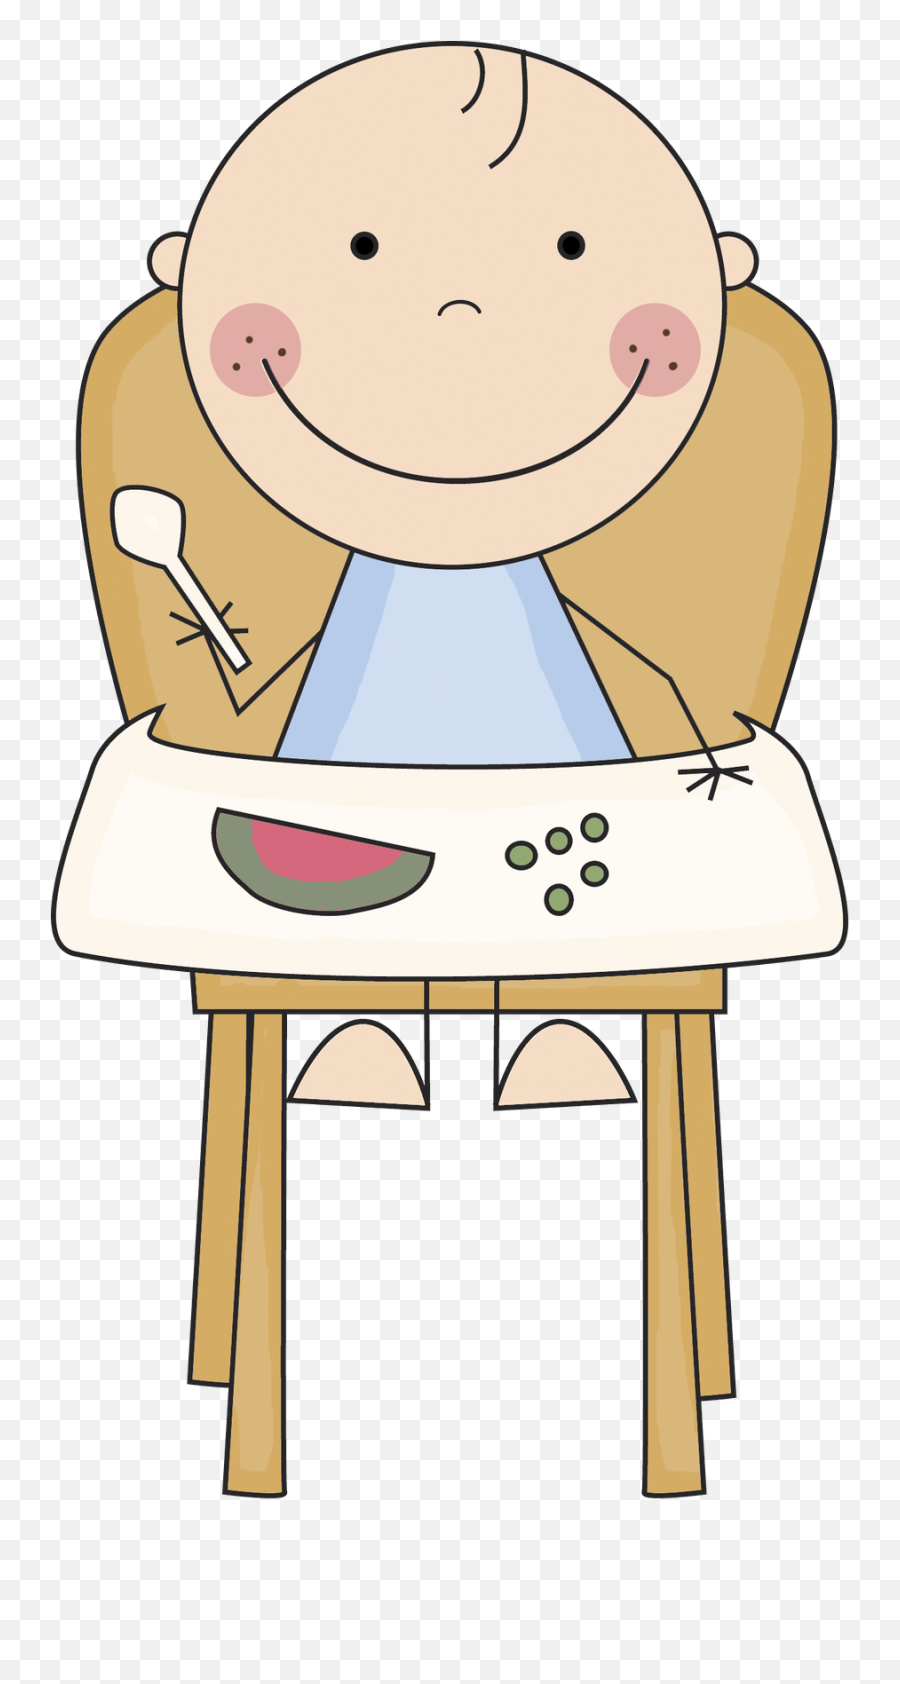 Pin By Carol Smith On Stick People - High Chair Clip Art Clipart Baby In High Chair Emoji,High Fives Clipart